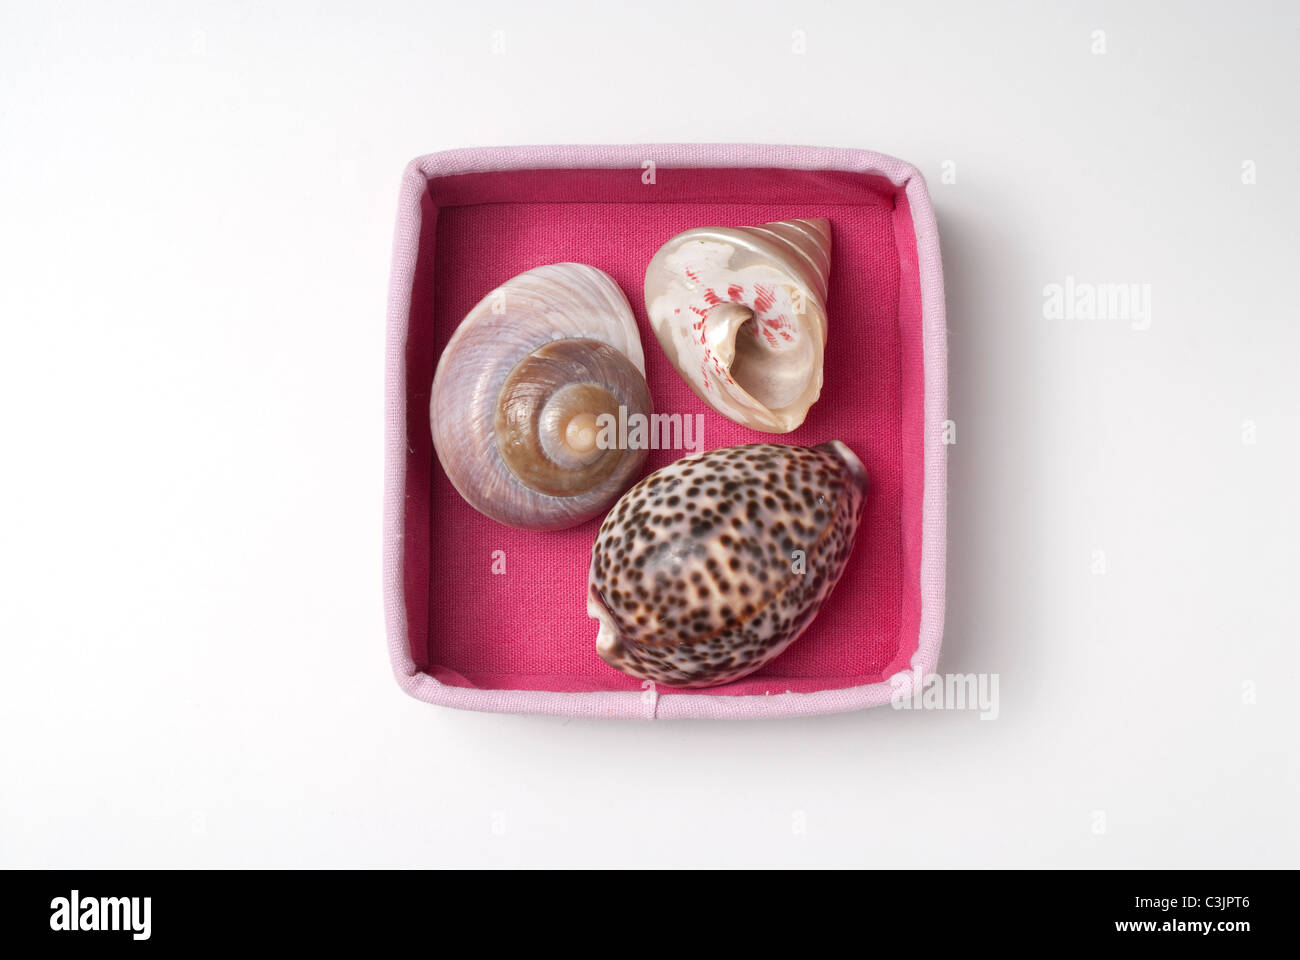 Sea shells framed in a pink box Stock Photo